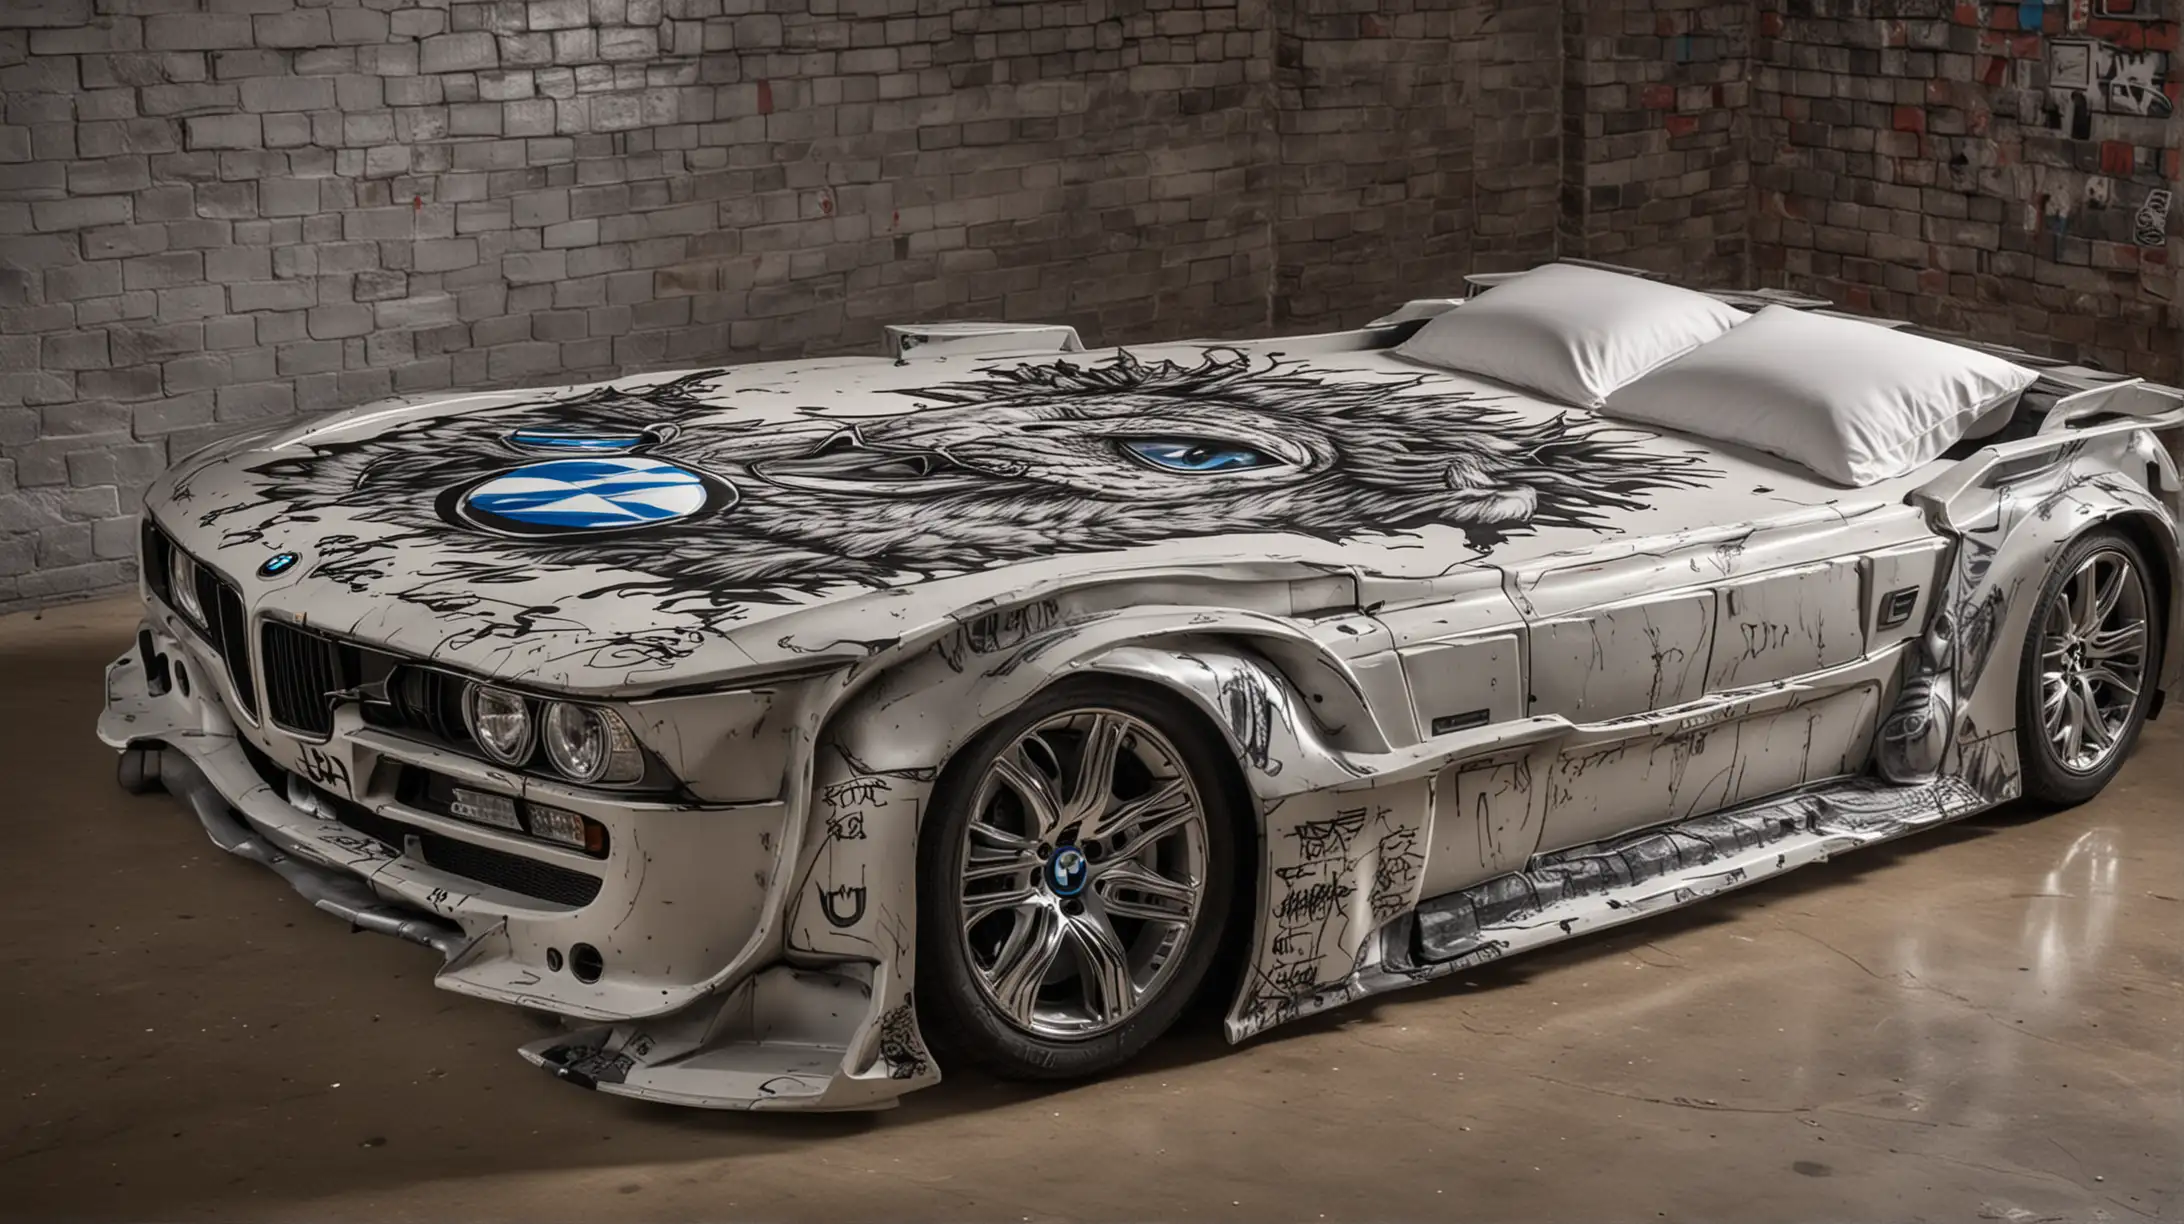 Luxury Bedroom Decor BMW CarShaped Double Bed with Dragon Graffiti and Headlights